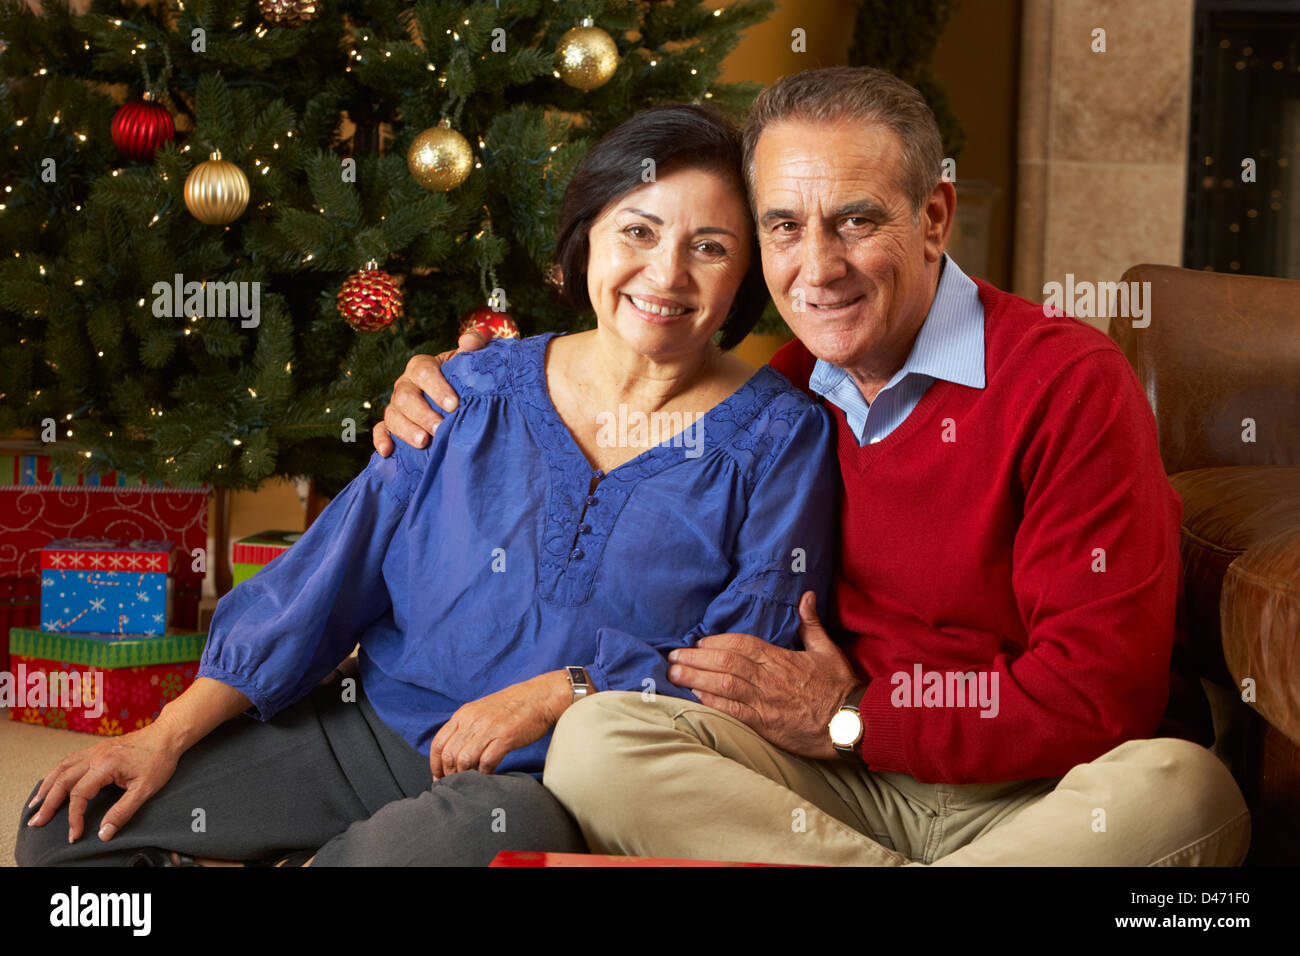 Senior Couple in front of Christmas Tree Banque D'Images